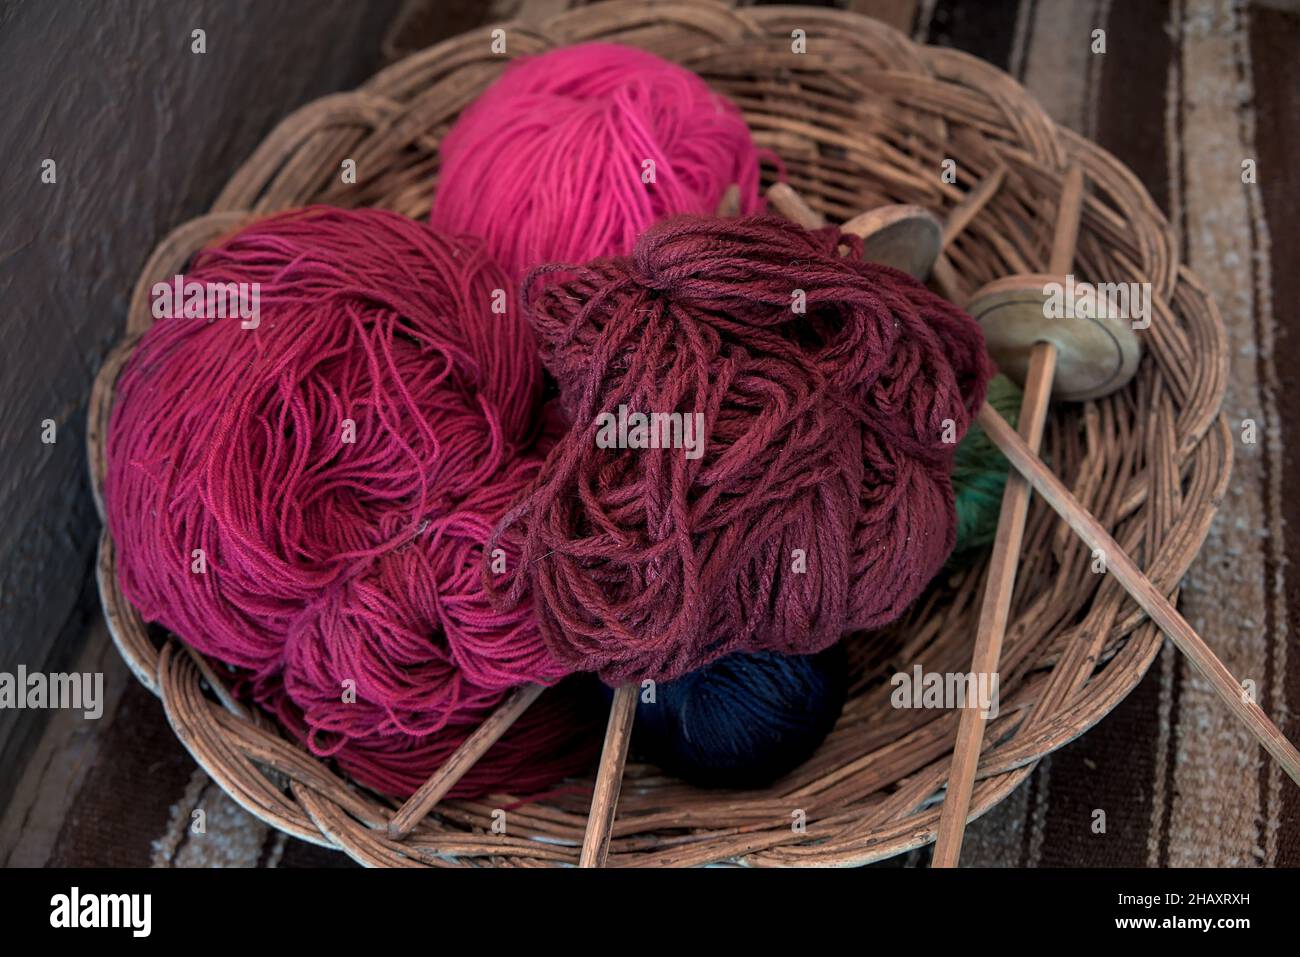 Dyed alpaca llama wool in balls with traditional knitting needles resting in wicker bowl basket at peruvian textile farm for tourists to see ancient m Stock Photo